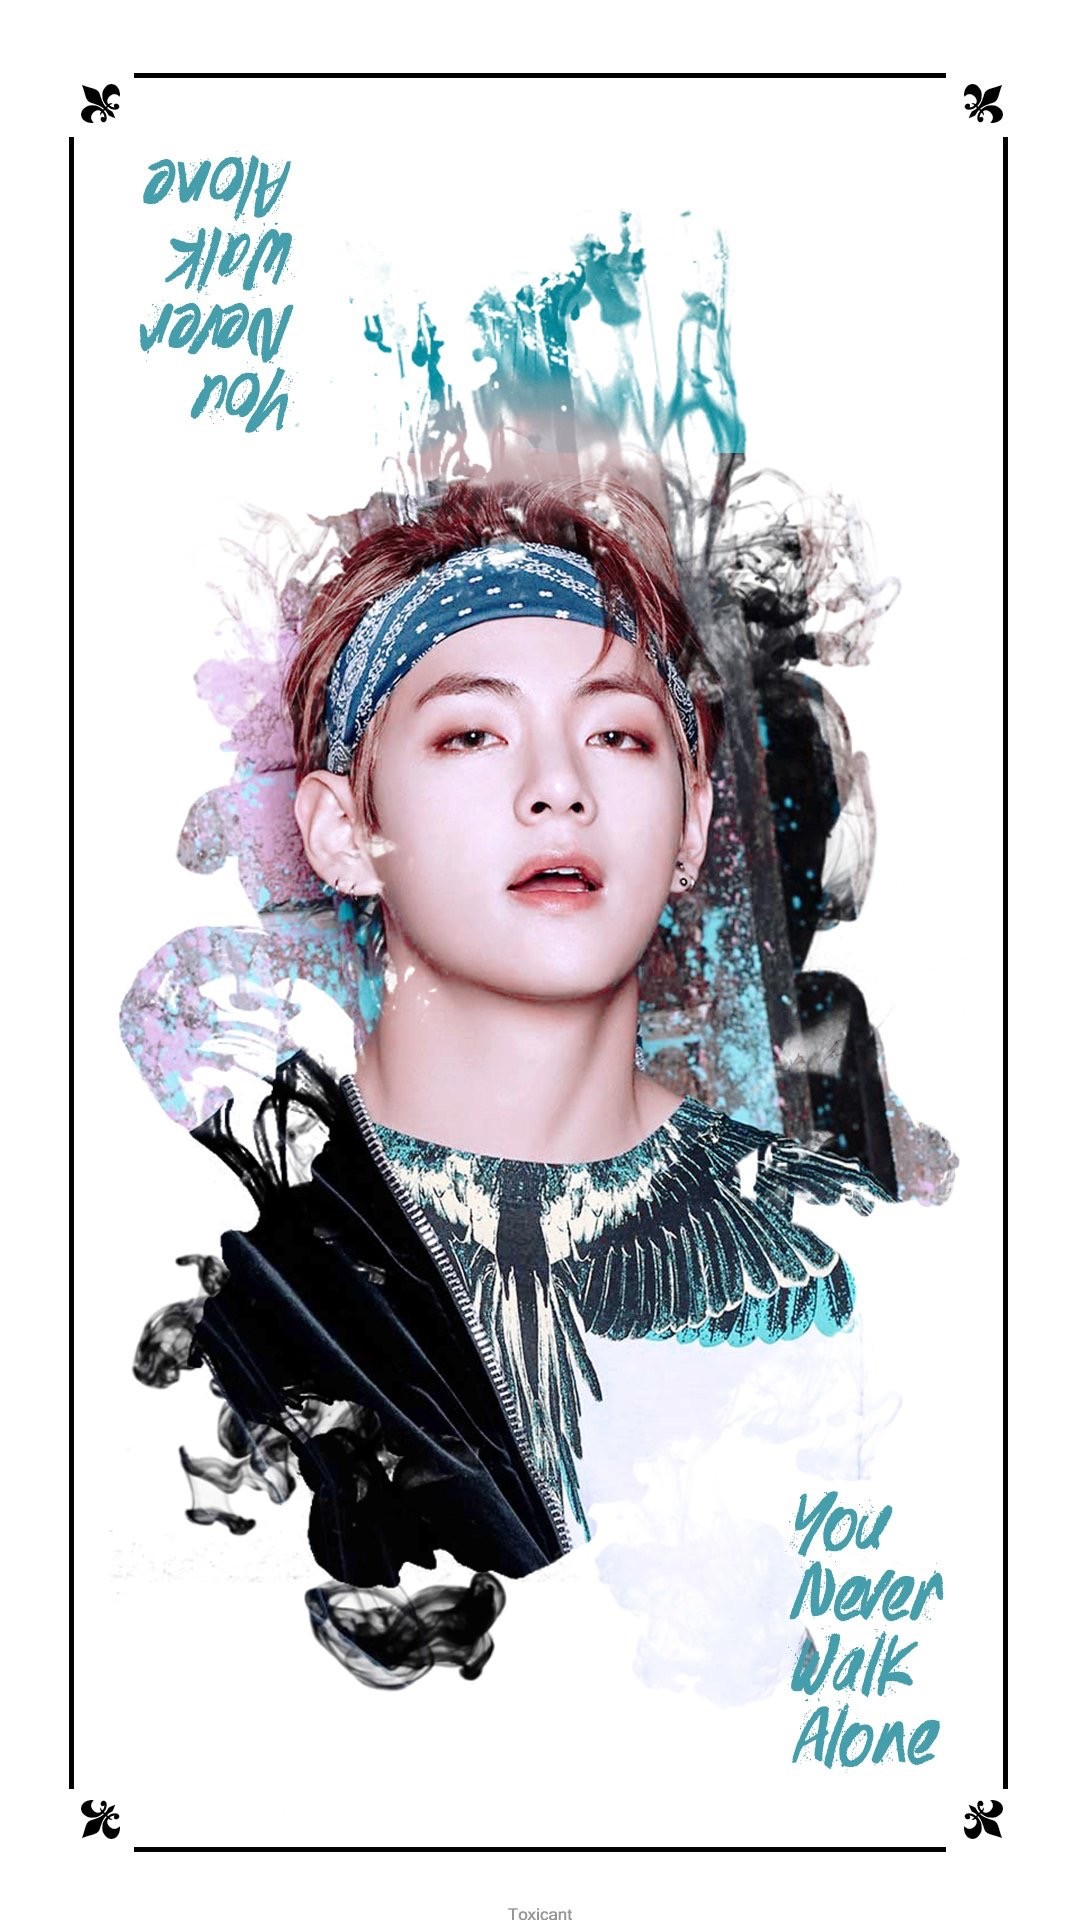 1080x1920 I would buy the balls off these if they made a full card set like this onr